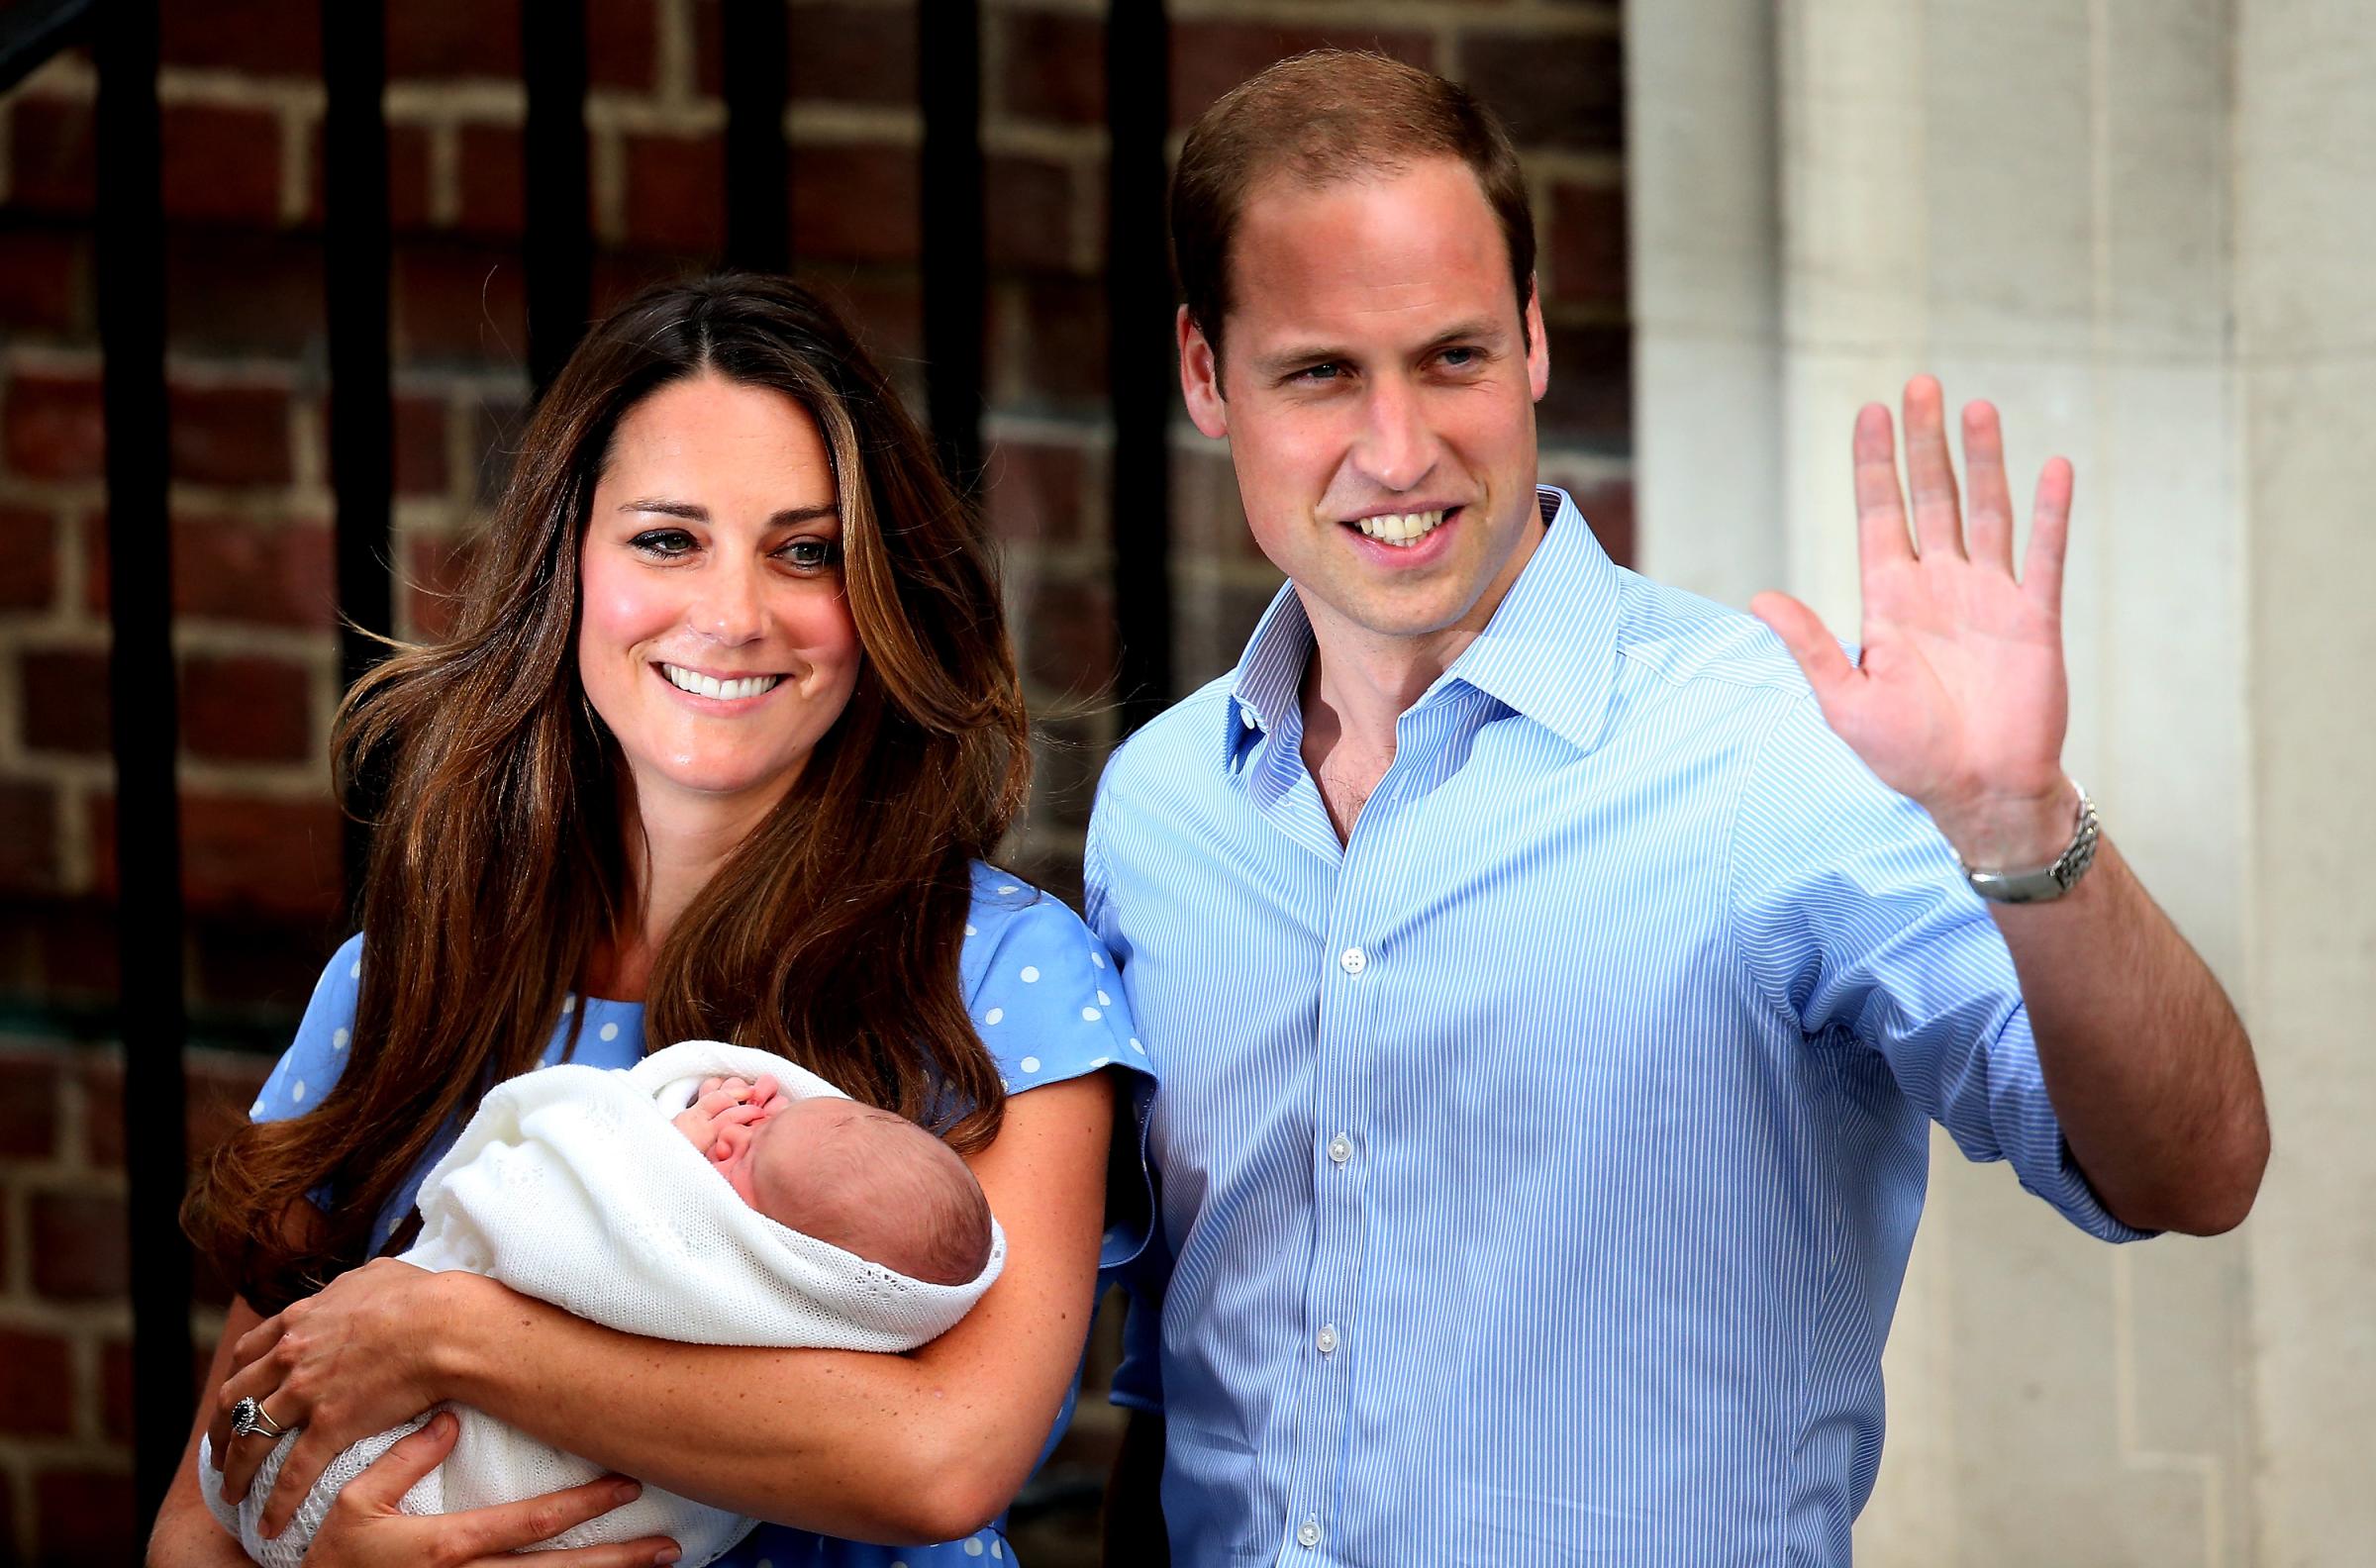 LONDON, ENGLAND - JULY 23: Prince William, Duke of Cambridge and Catherine, Duchess of Cambridge, depart The Lindo Wing with their newborn son at St Mary's Hospital on July 23, 2013 in London, England. The Duchess of Cambridge yesterday gave birth to a boy at 16.24 BST and weighing 8lb 6oz, with Prince William at her side. The baby, as yet unnamed, is third in line to the throne and becomes the Prince of Cambridge. (Photo by Scott Heavey/Getty Images)